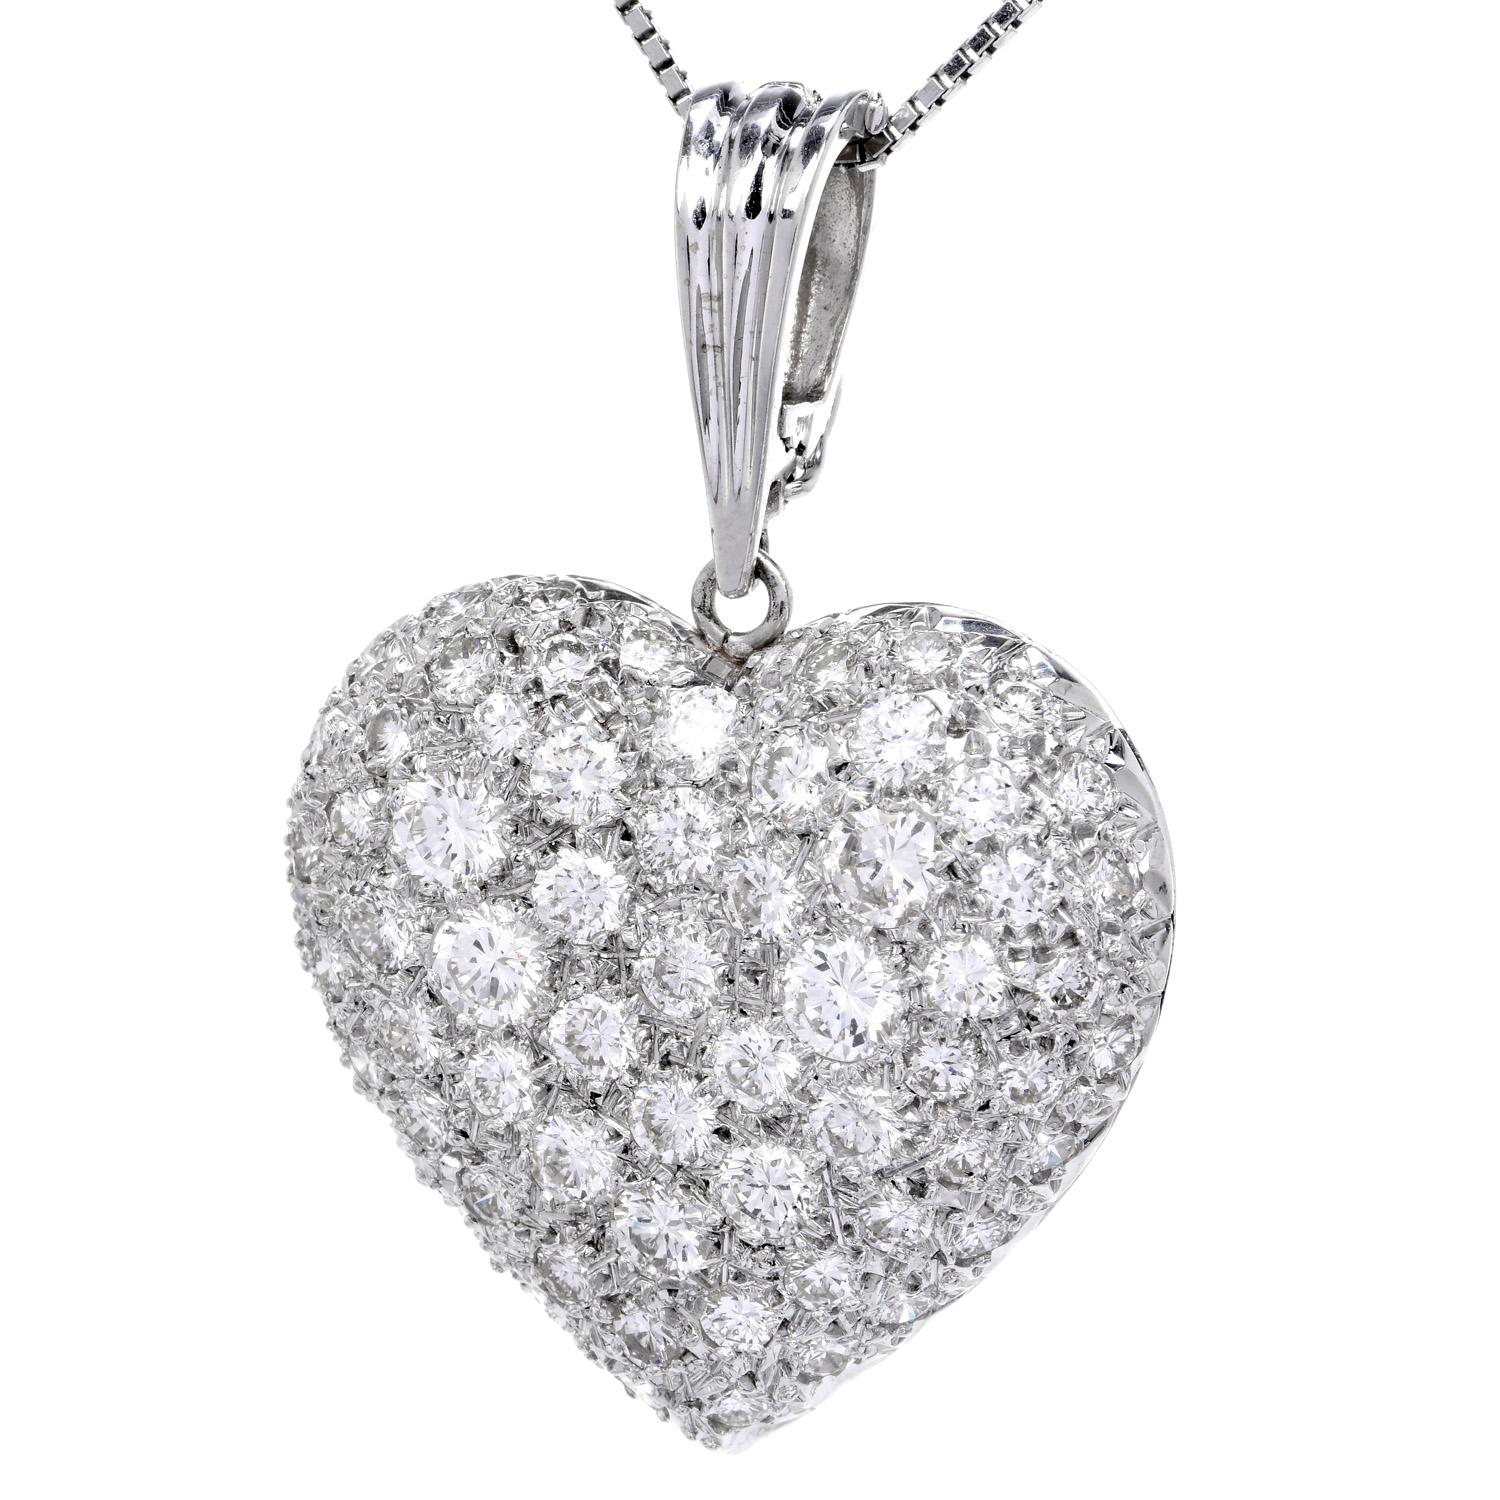 Make every day full of sparkle & romance with this dazzling large Heart Inspired Pendant Enhancer, it made of 18k gold .

Featuring (65) Fiery Icy White Round Cut Diamonds, G-H color,  VS clarity. weighting in total 7.50  carats.

This exquisite